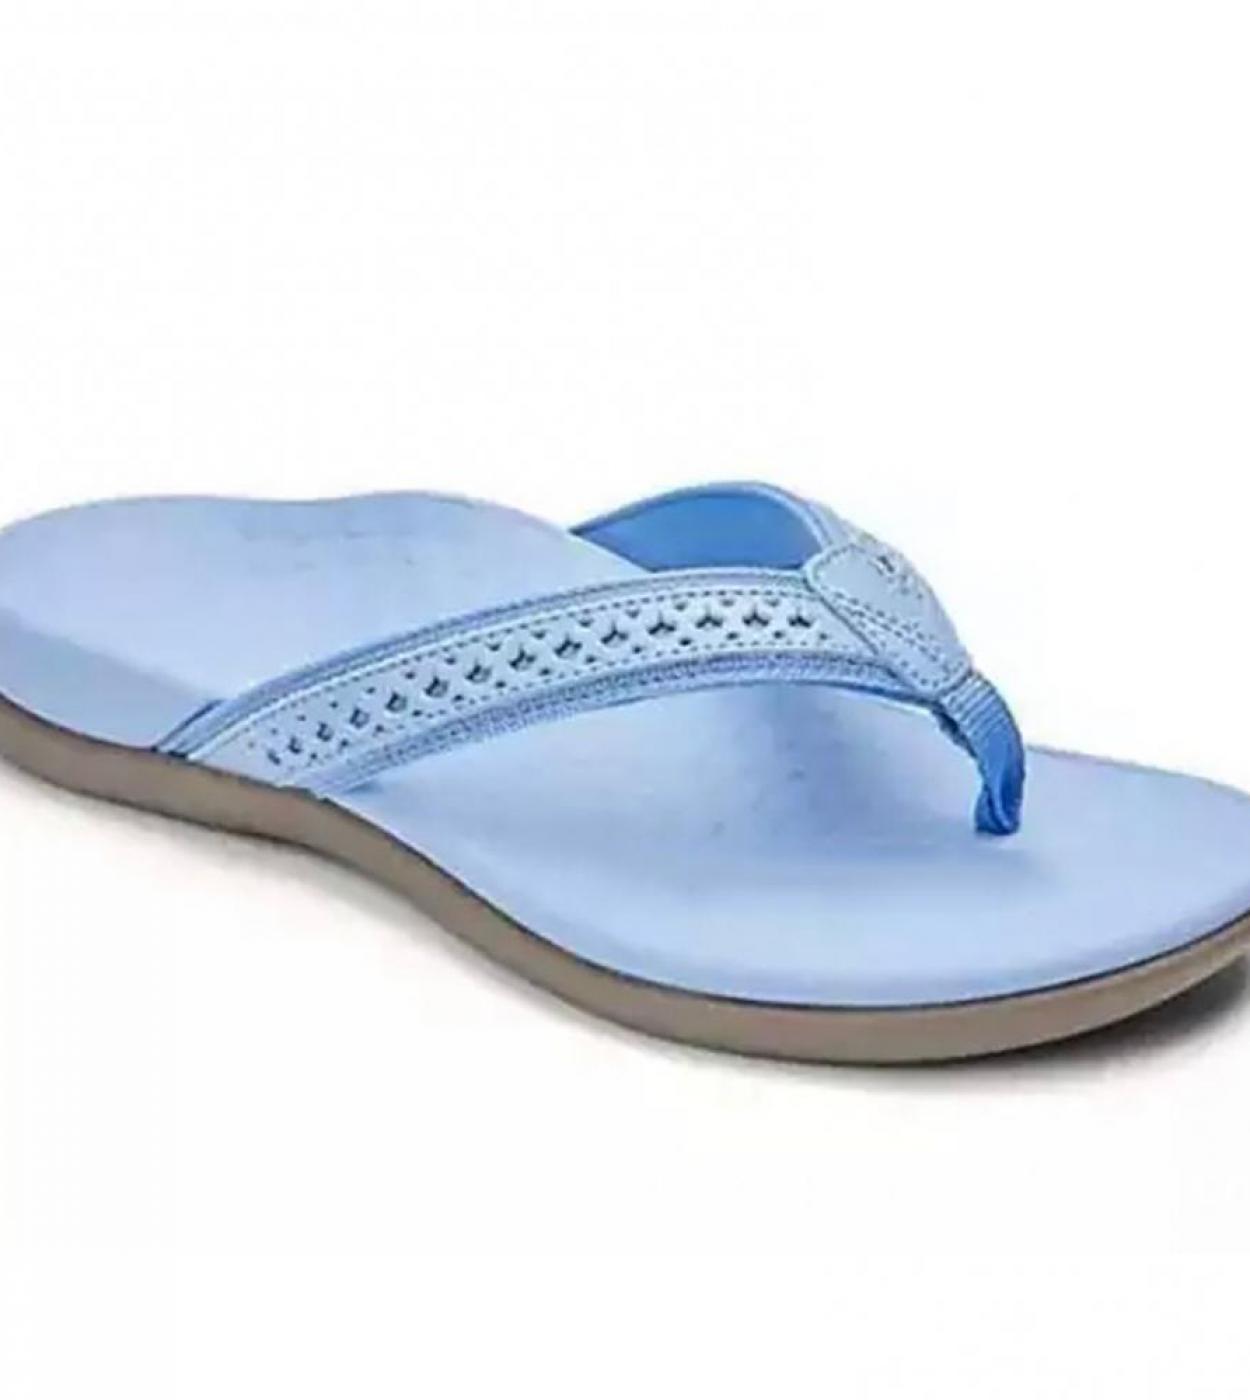 35   43 Women Summer Slippers Faux Leather Casual Thick Heel Anti Skid Flip Flops Outdoor Beach Sandals